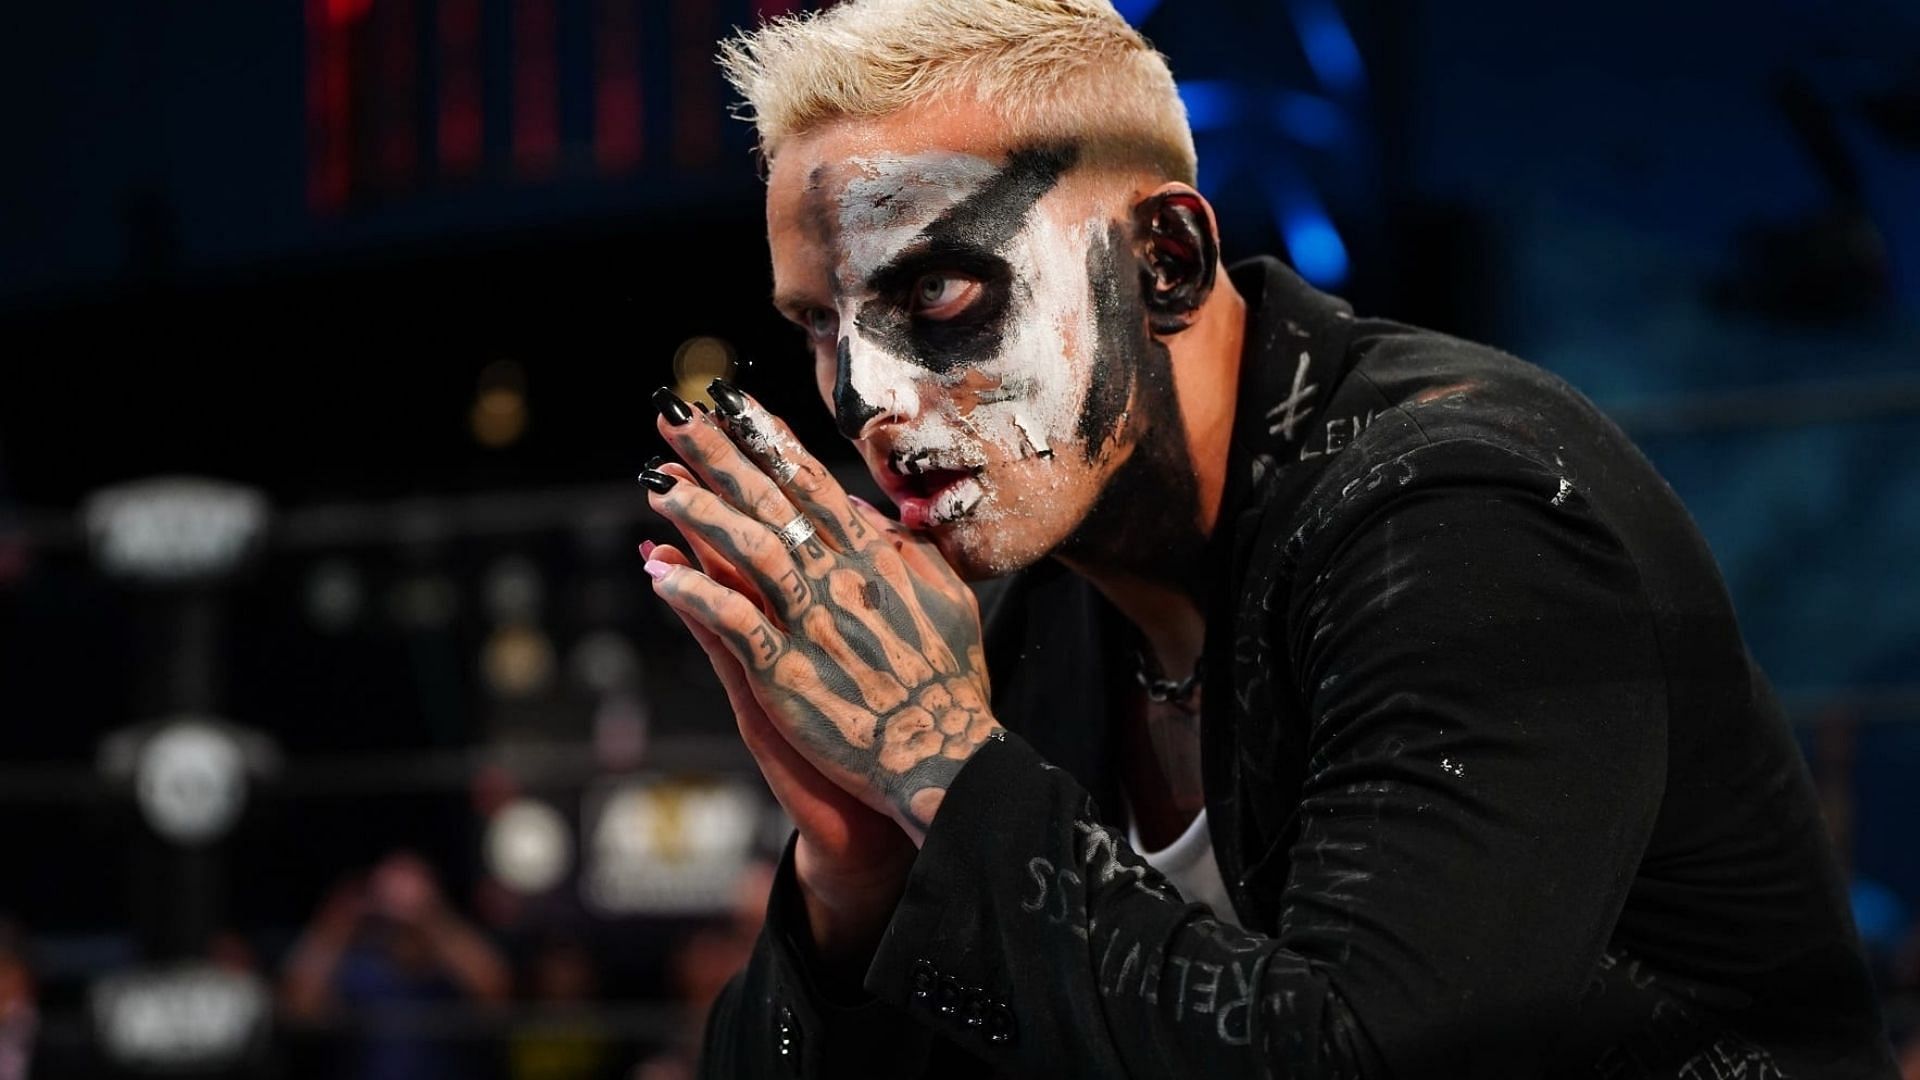 Darby Allin will challenge for the title for the first time since May